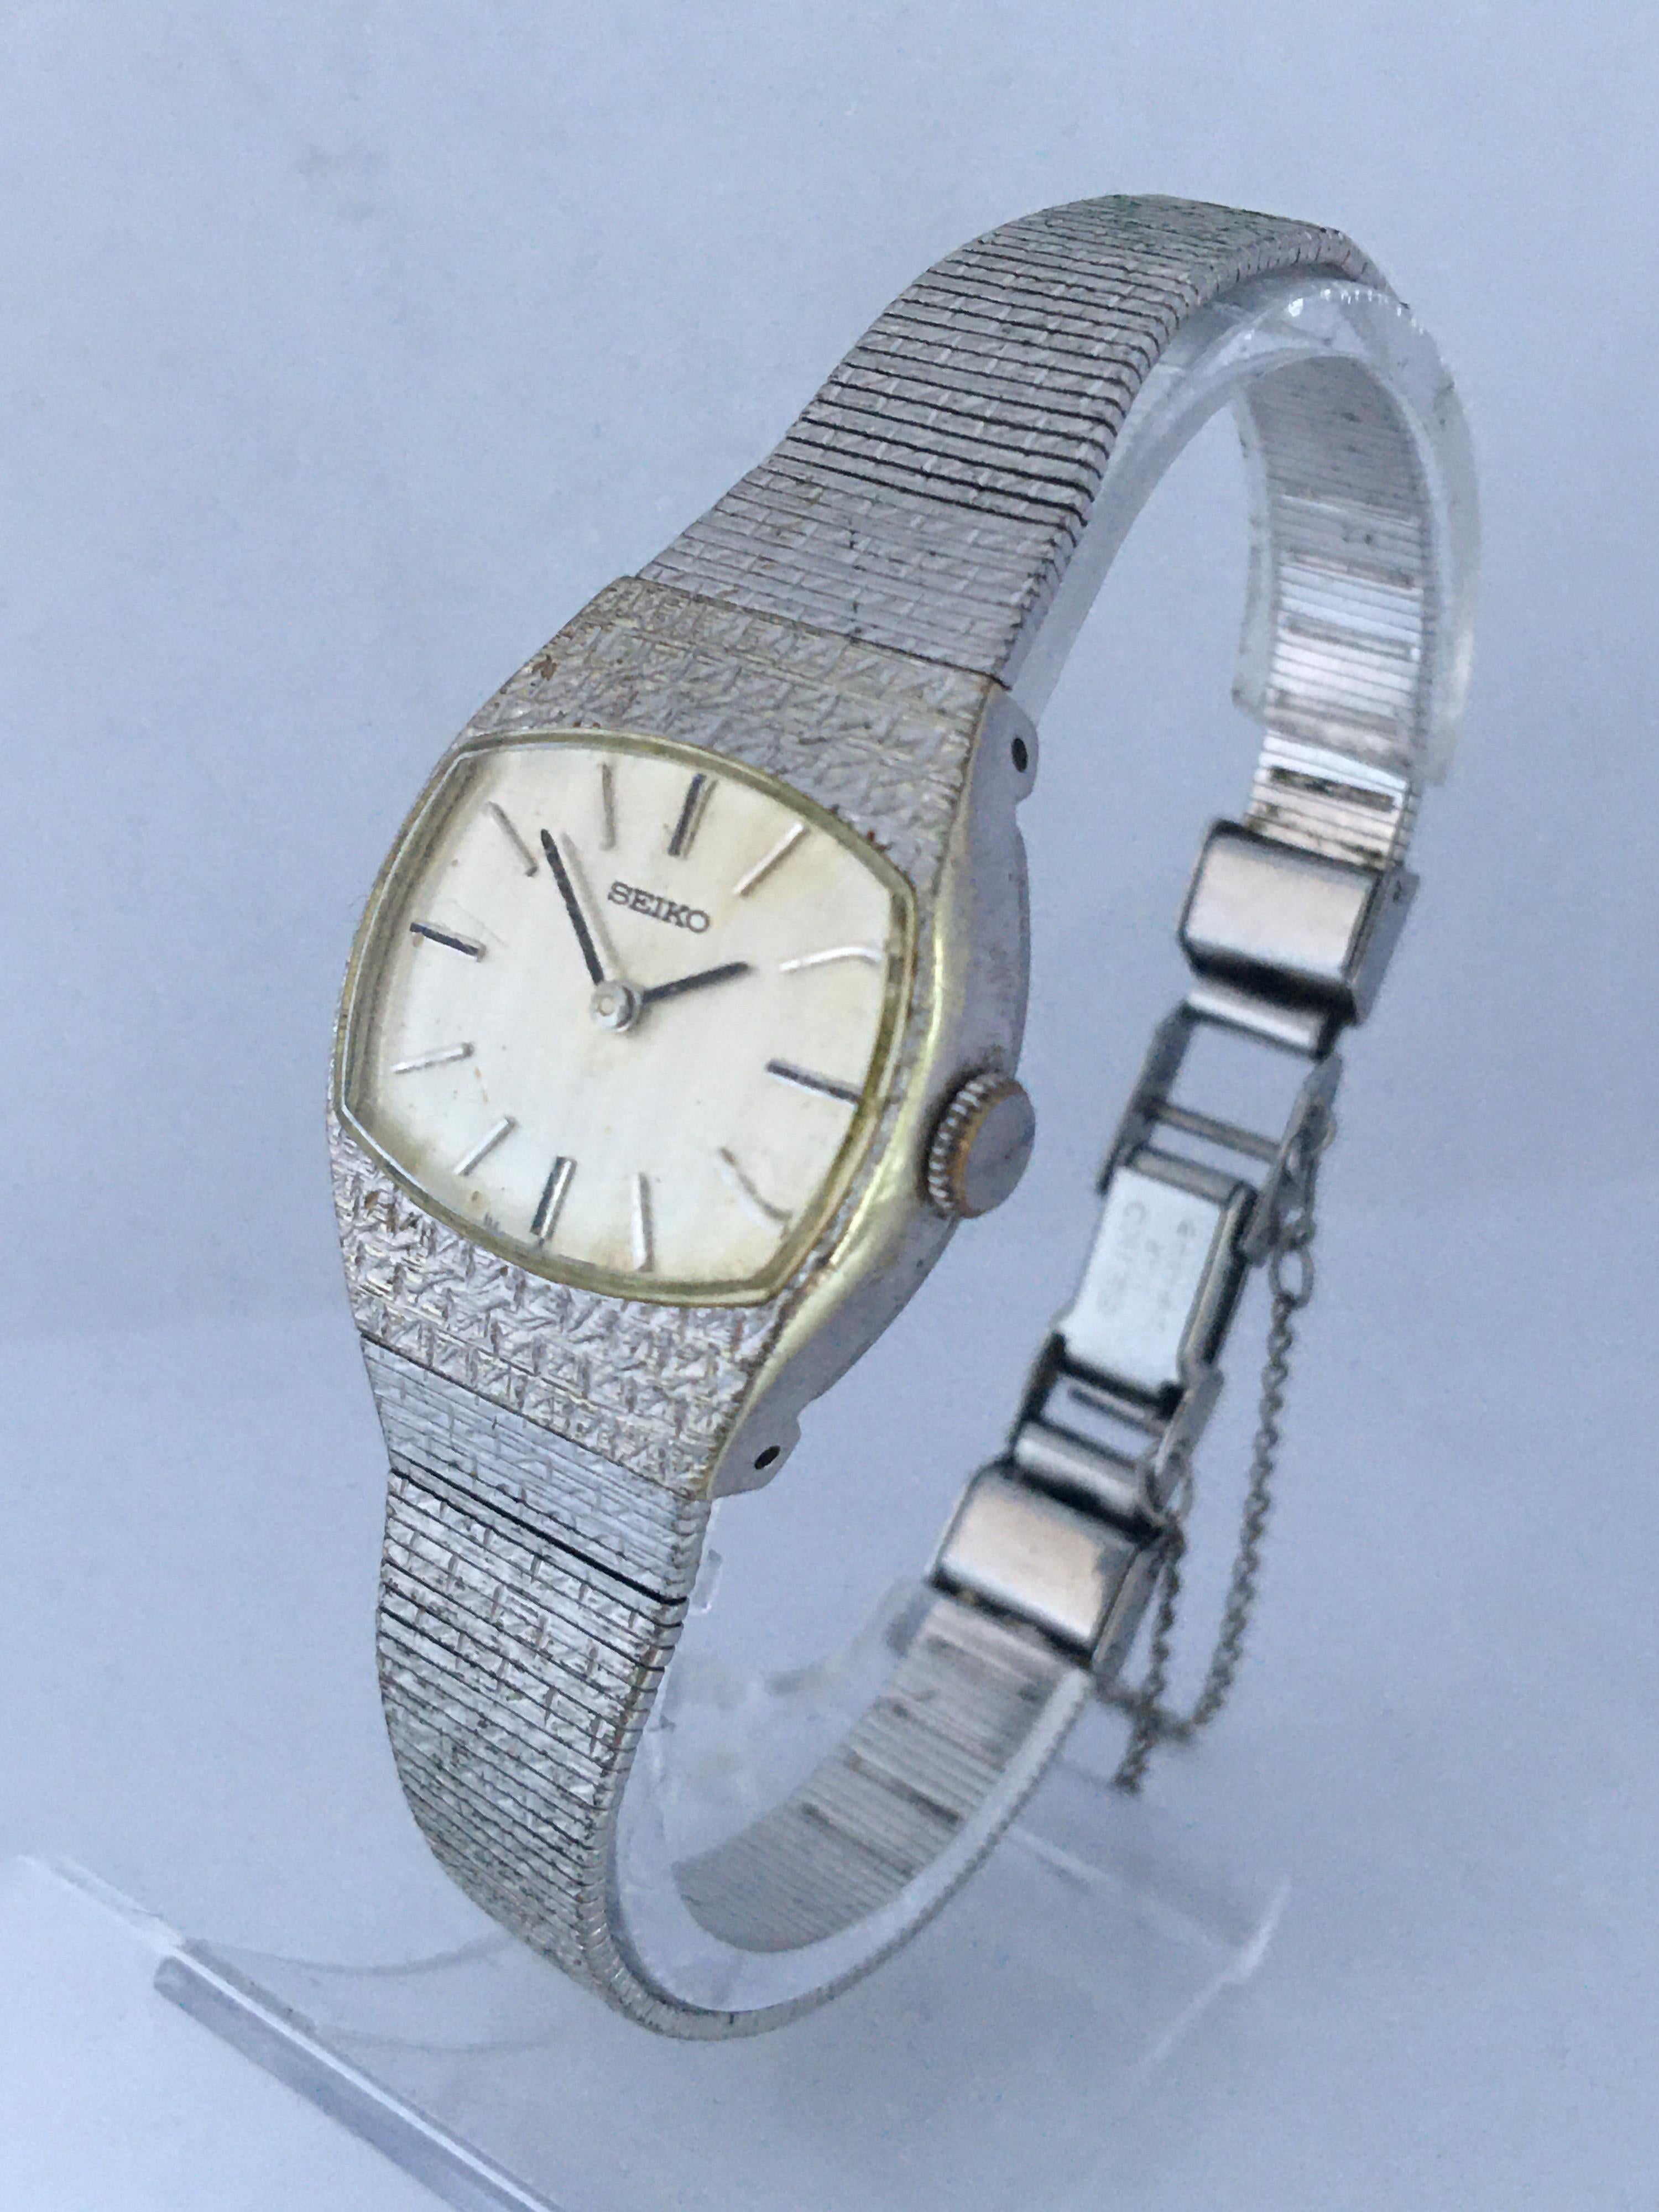 Ladies Seiko Watches - 7 For Sale on 1stDibs | old seiko ladies watches, antique  seiko gold watch womens vintage, seiko women's watches vintage